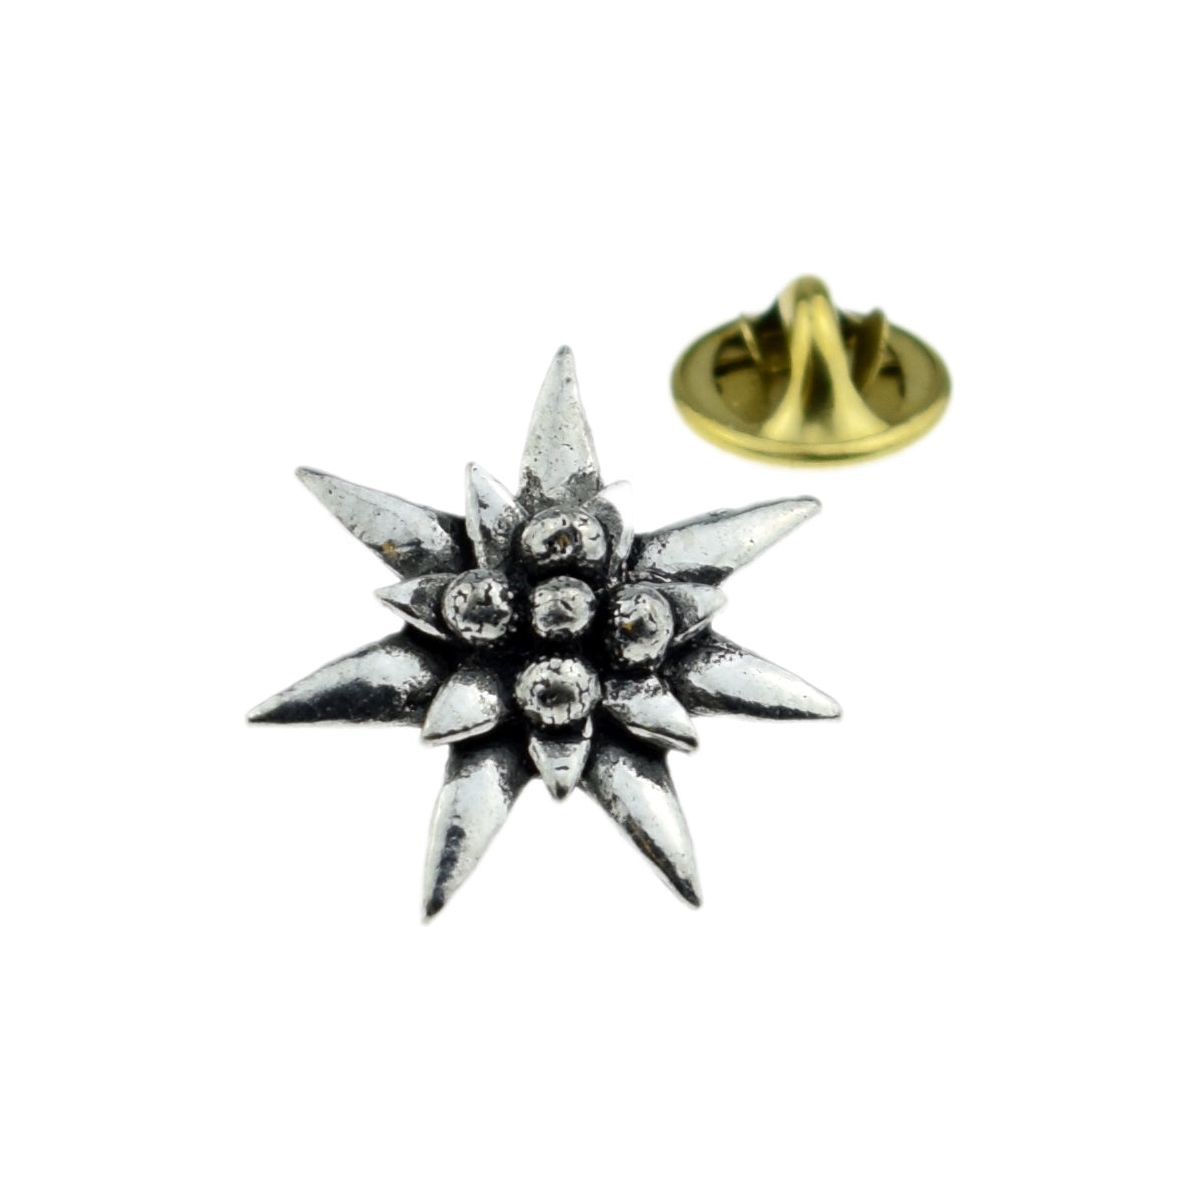 Small Edelweiss Pewter Lapel Pin Badge - Ashton and Finch